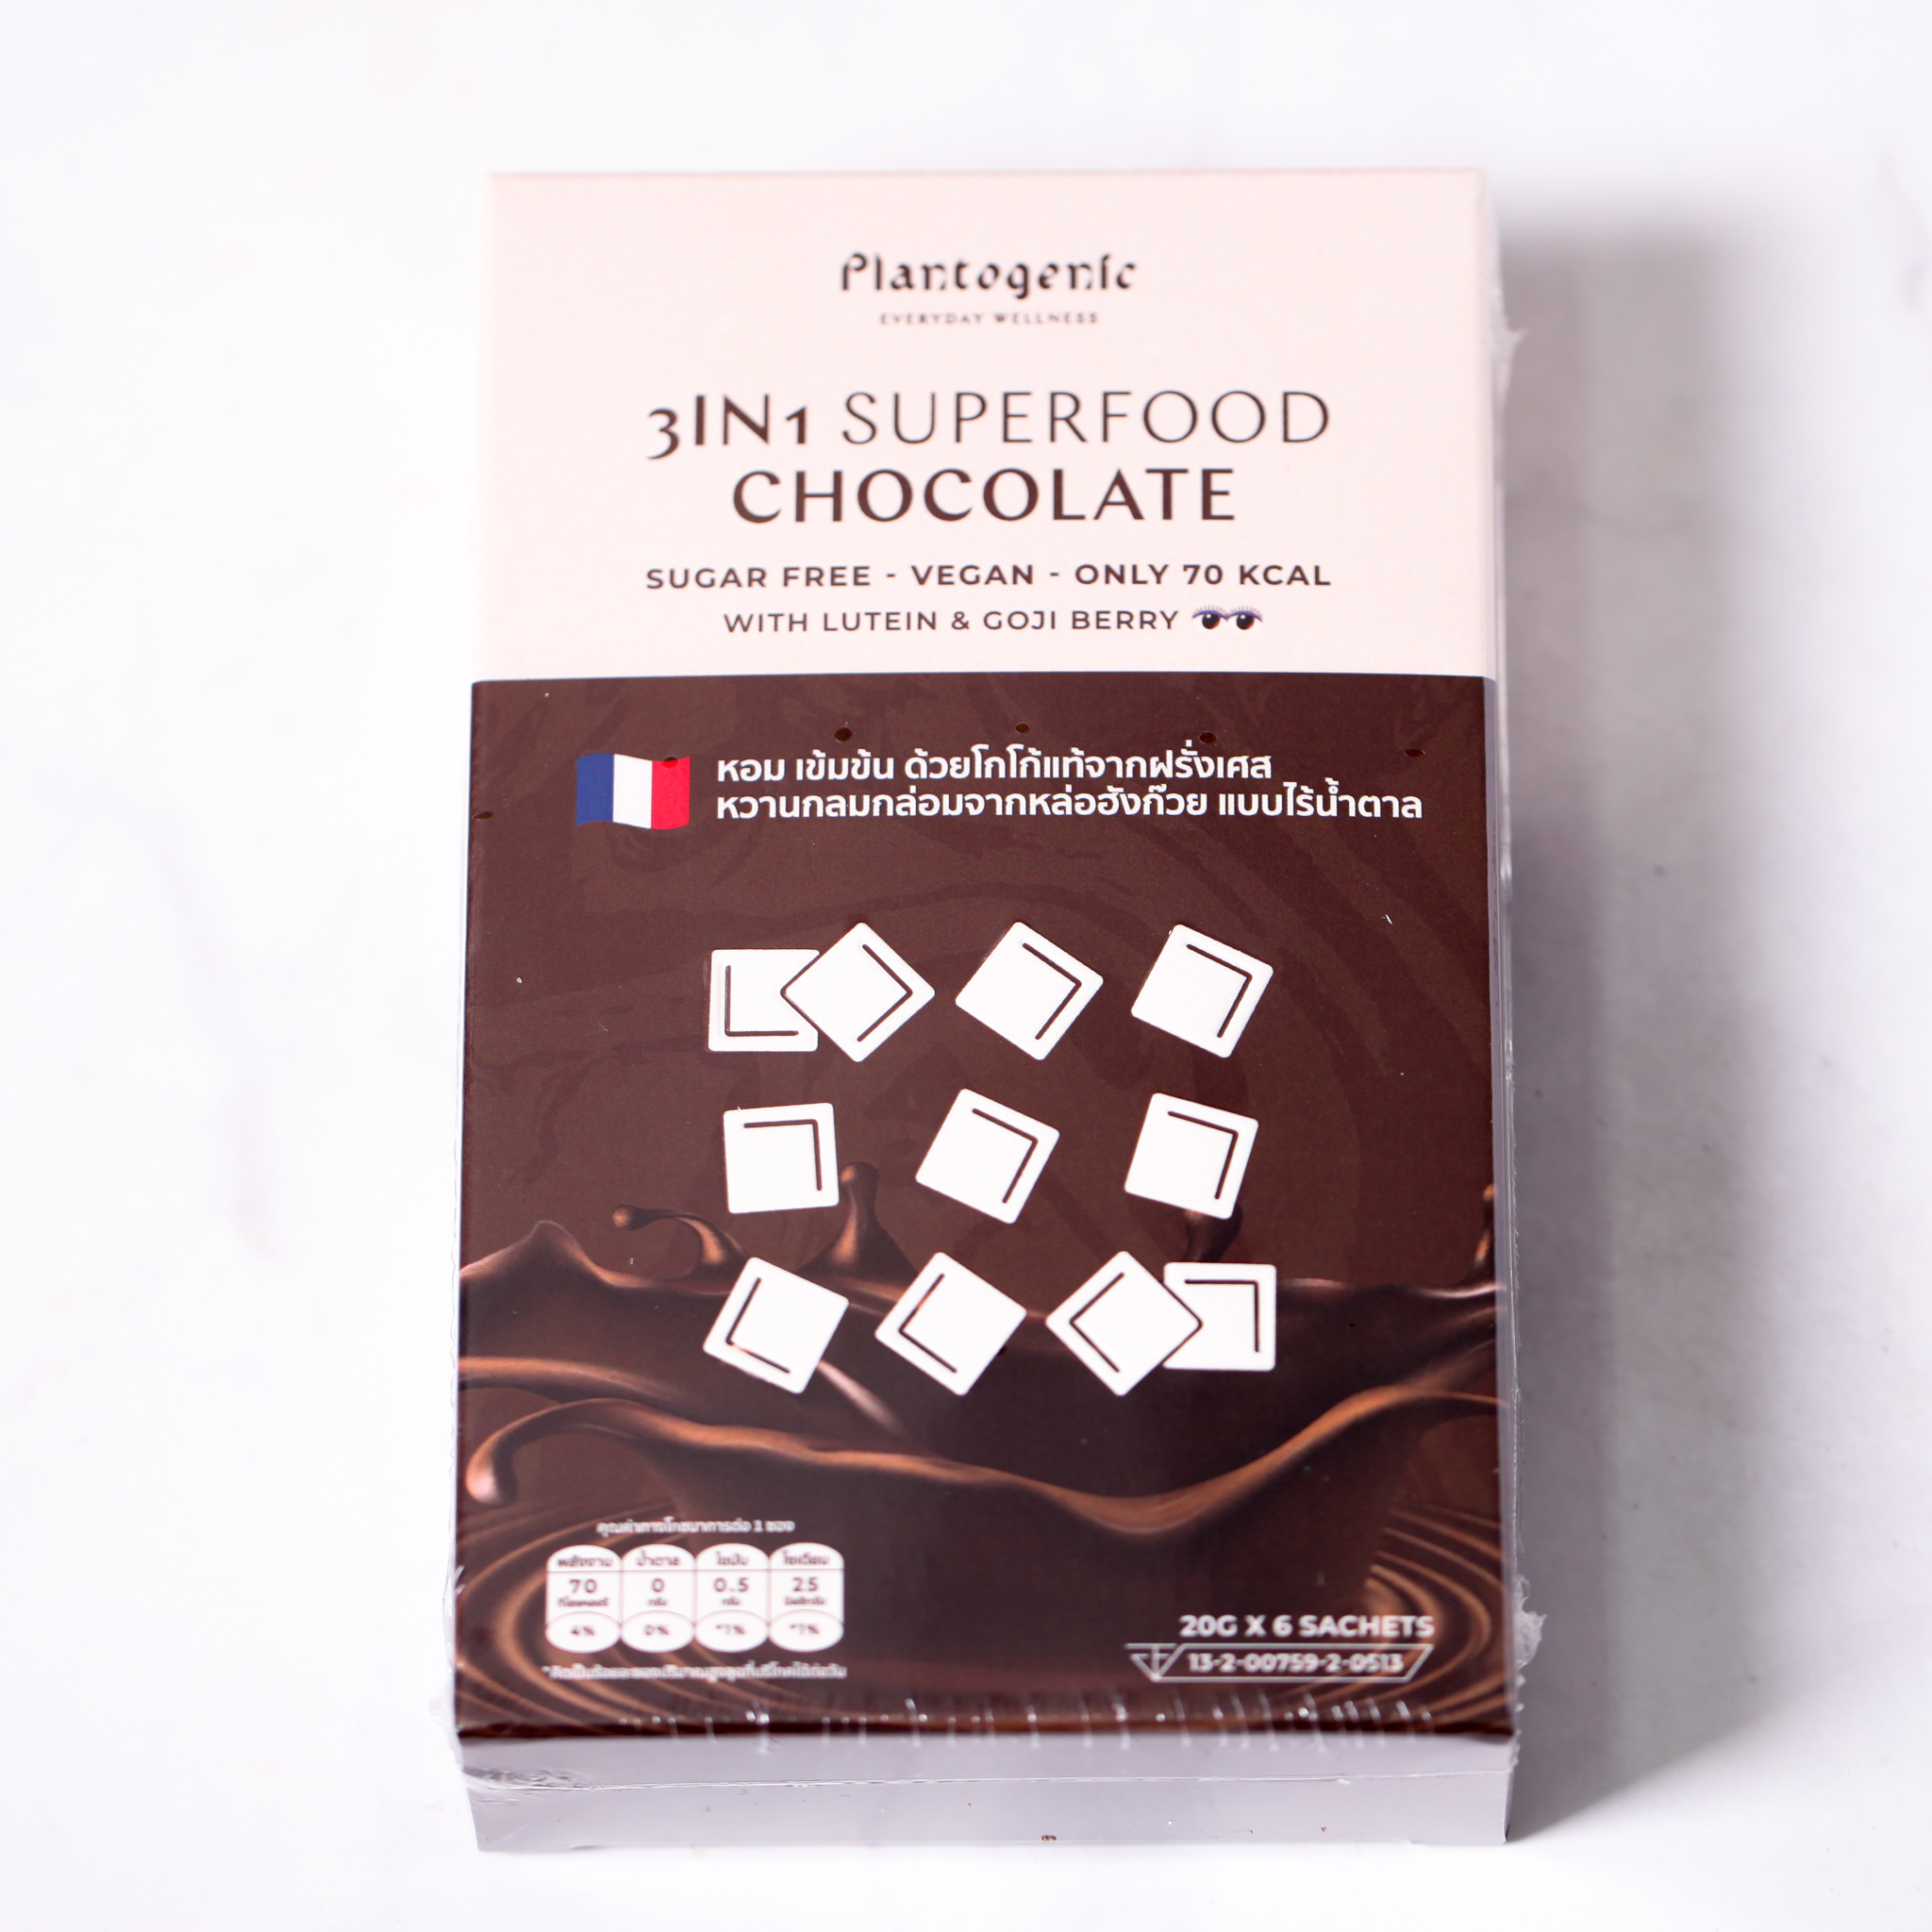 Superfood Chocolate 3 in 1